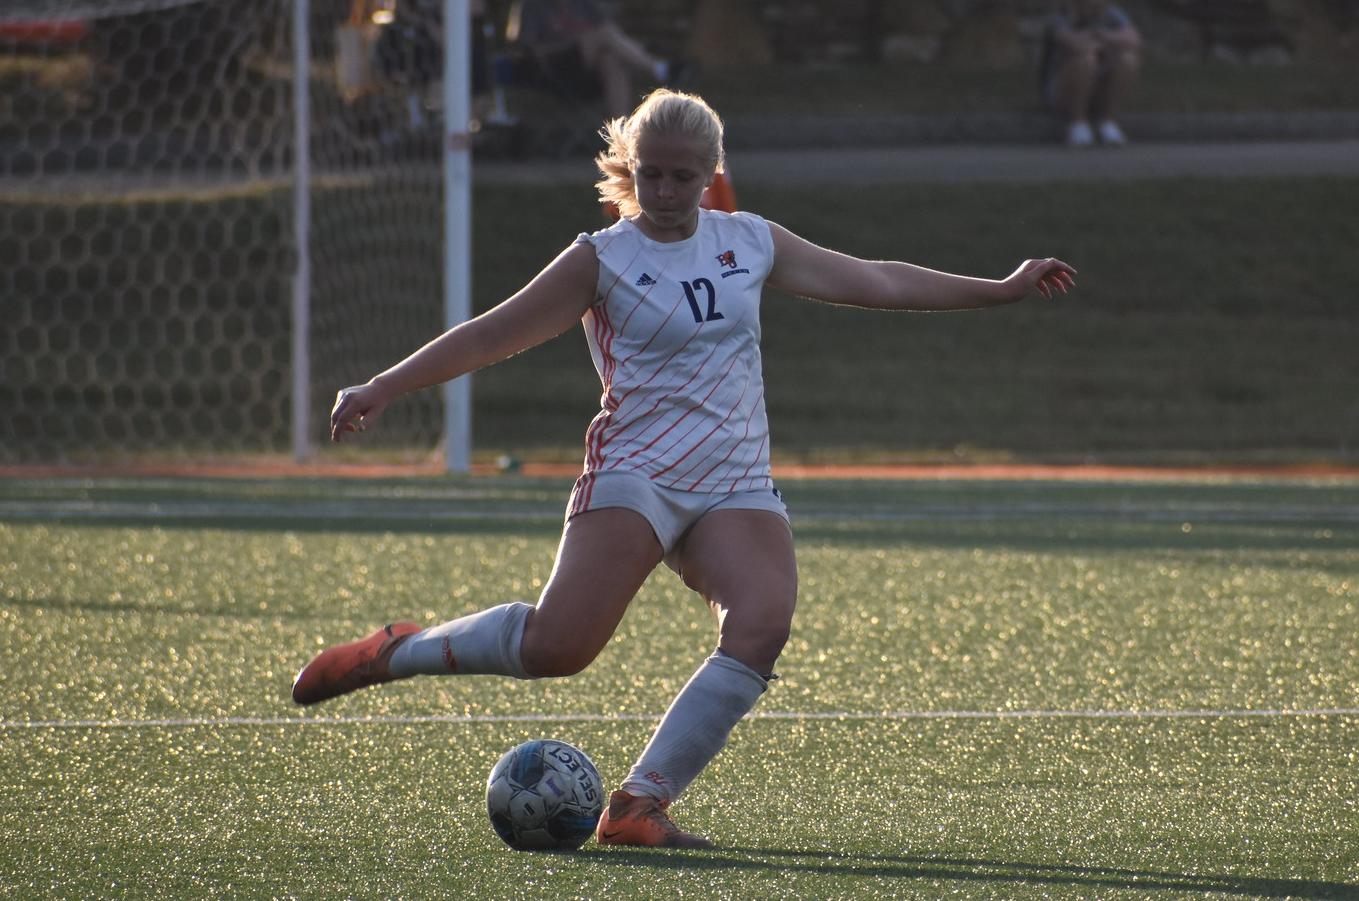 Pair of First-Half Goals Leads Wildcats to 2-0 Victory Over Park